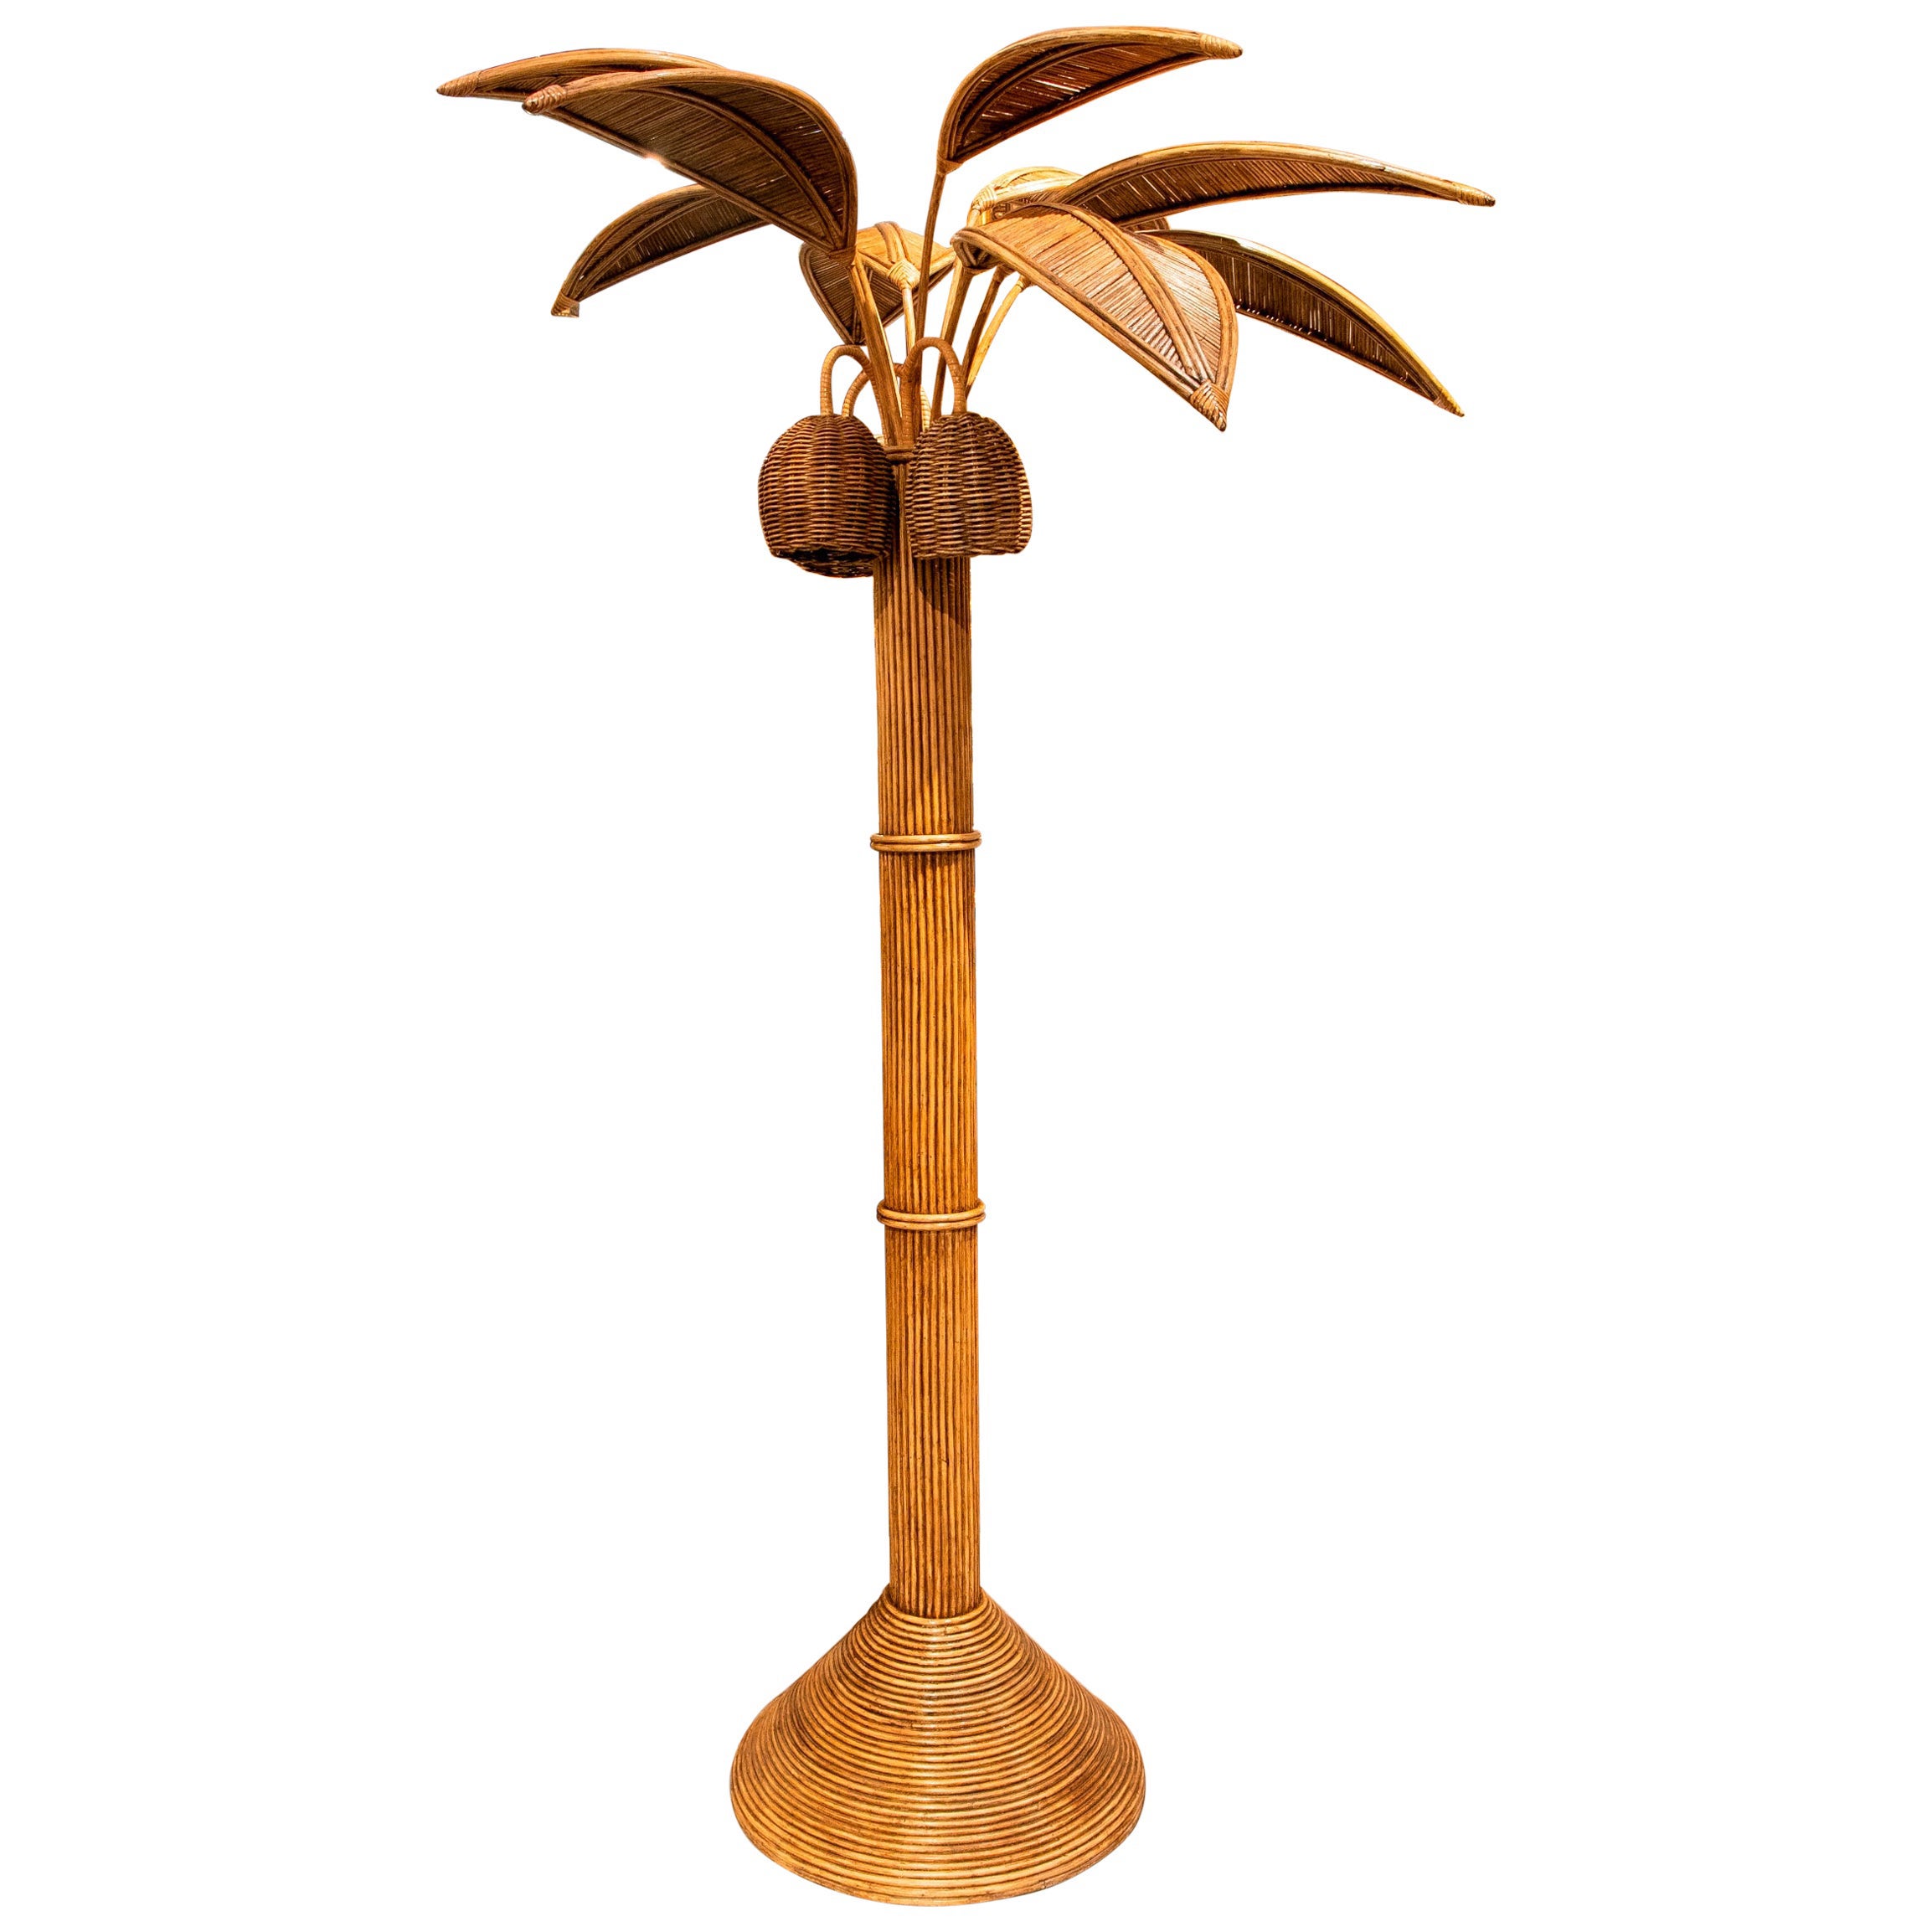 1980s Spanish Woven Wicker Palm Tree Statue For Sale at 1stDibs